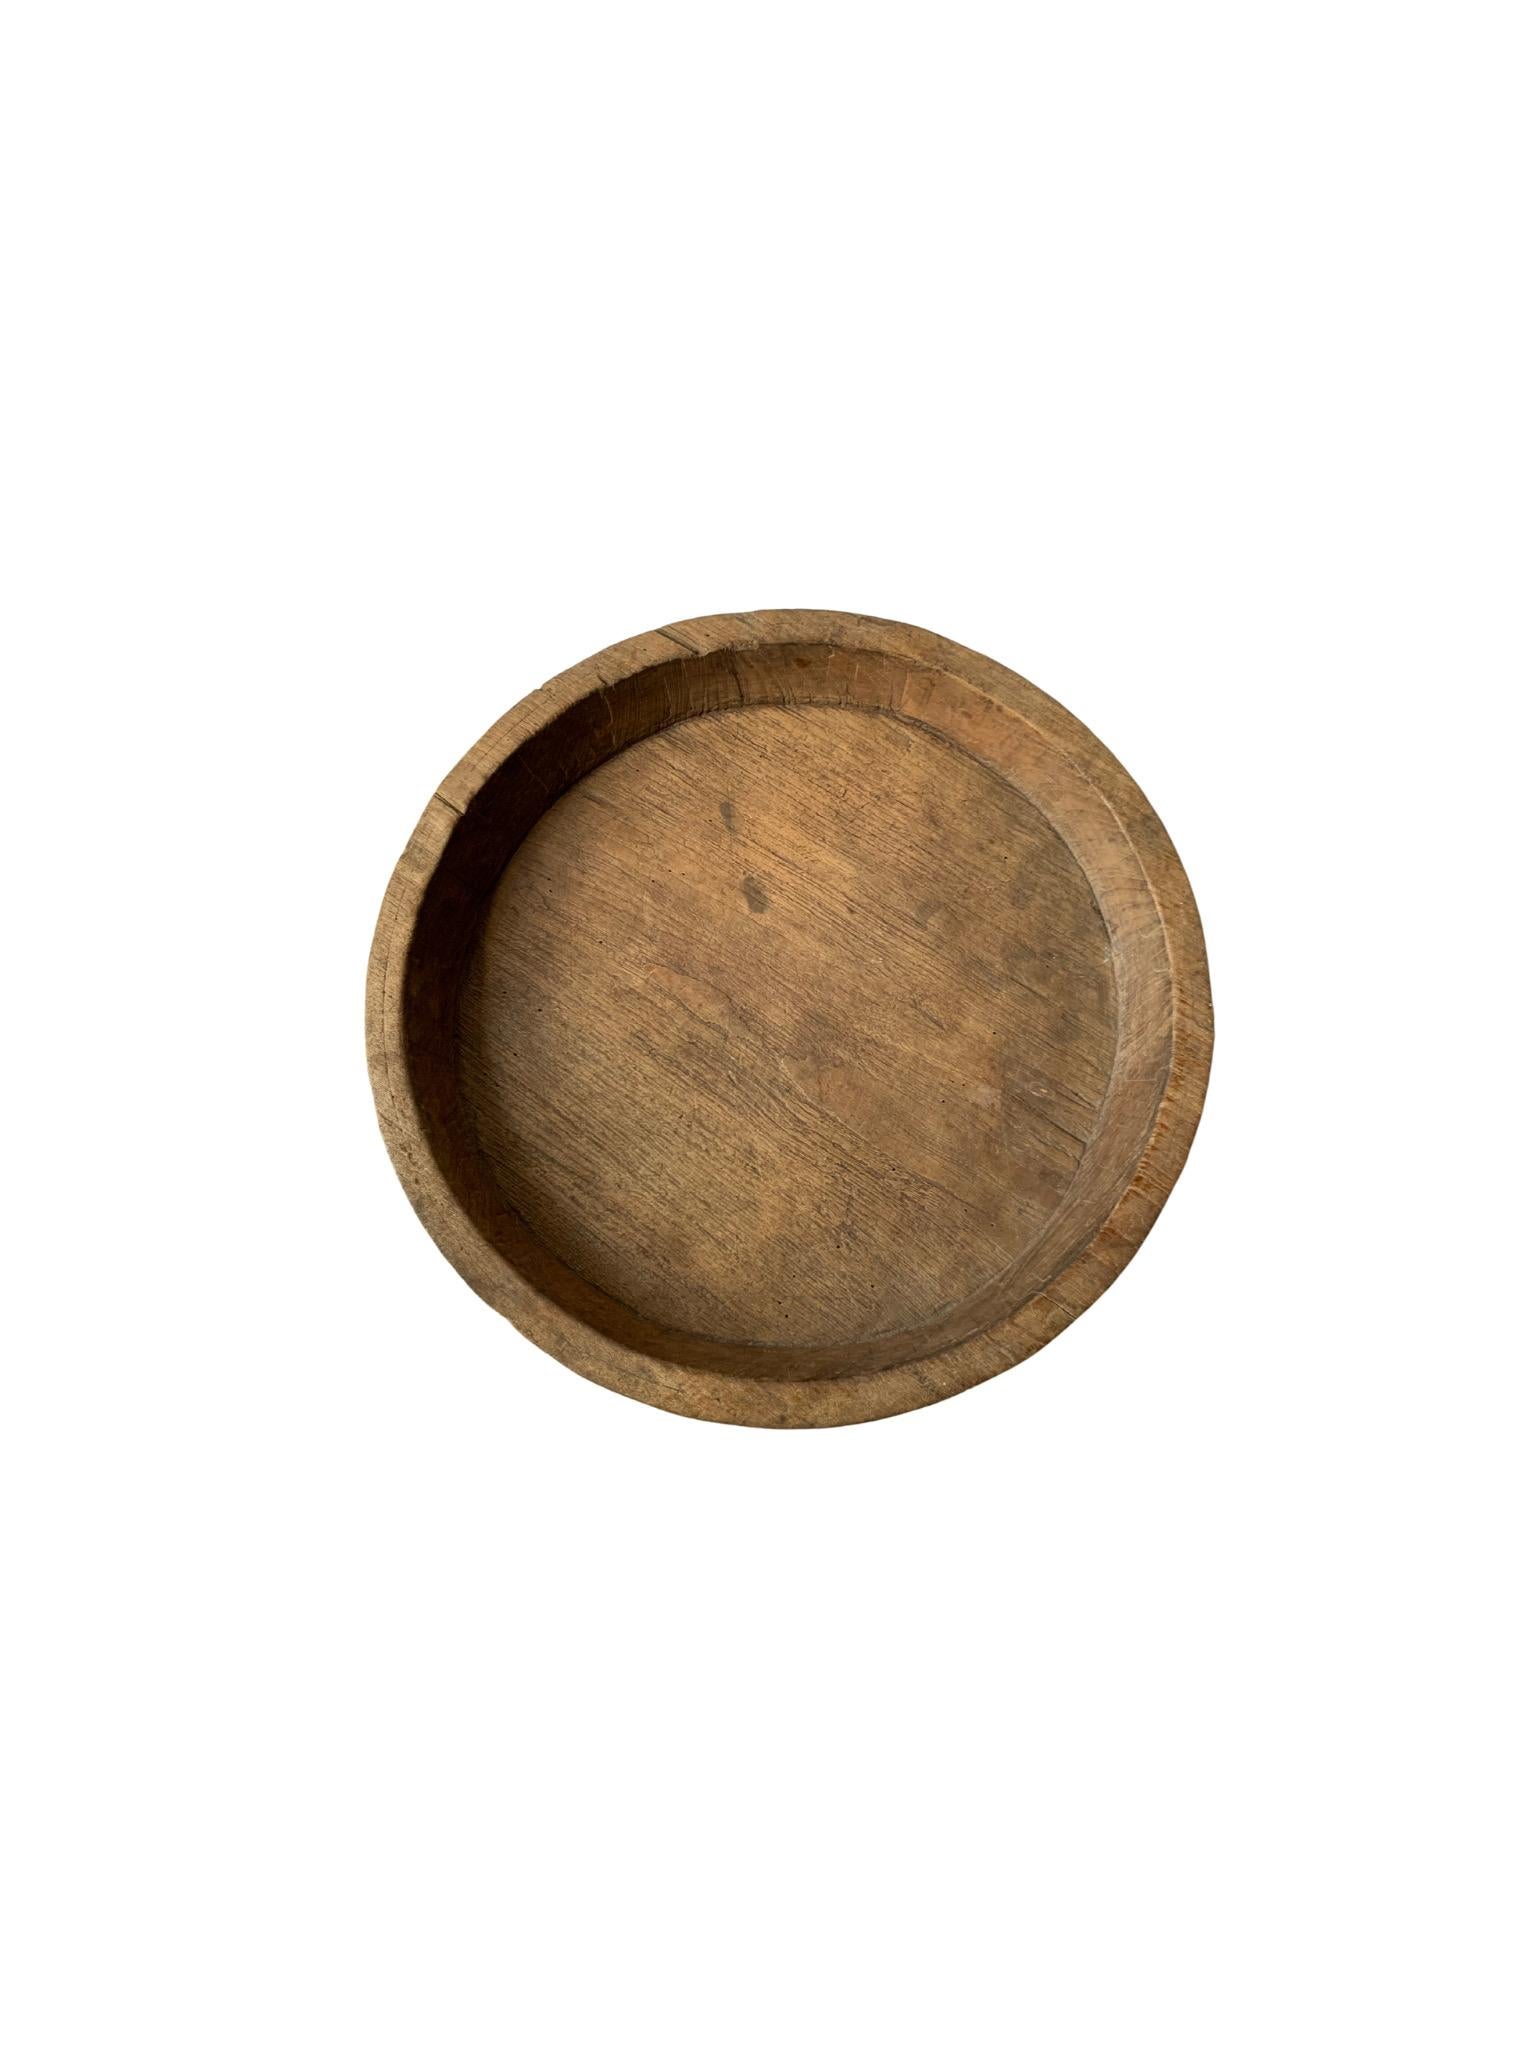 A teak wood bowl crafted on the island of Java, Indonesia. The bowl was cut from a much larger slab of wood and maintains a minimalist design. 

